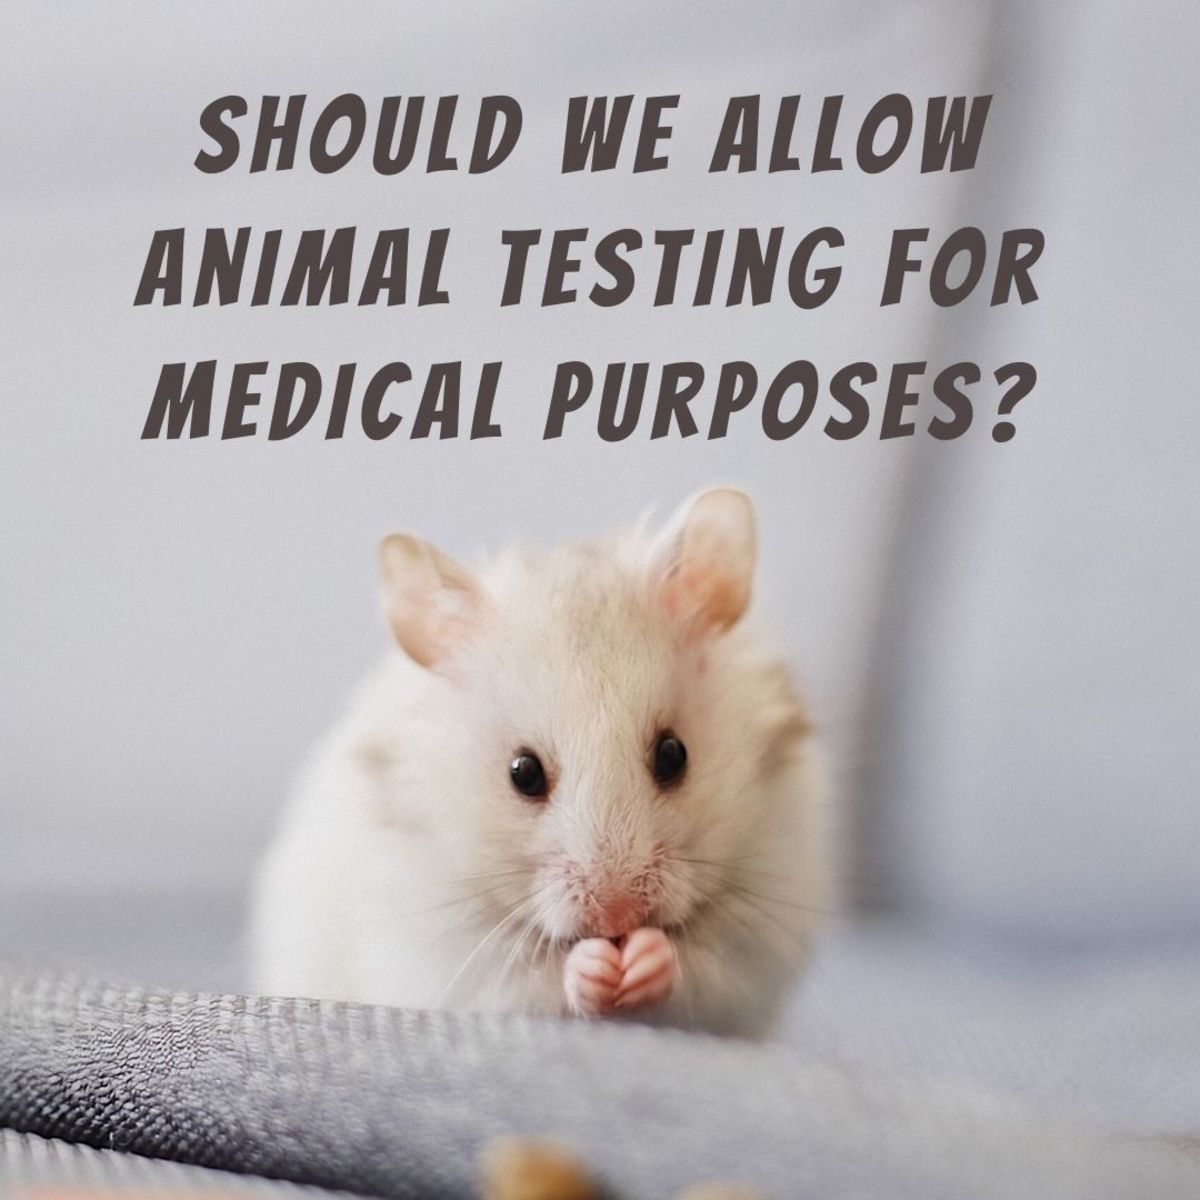 Is it ethical to allow animals to be tested for medical purposes?